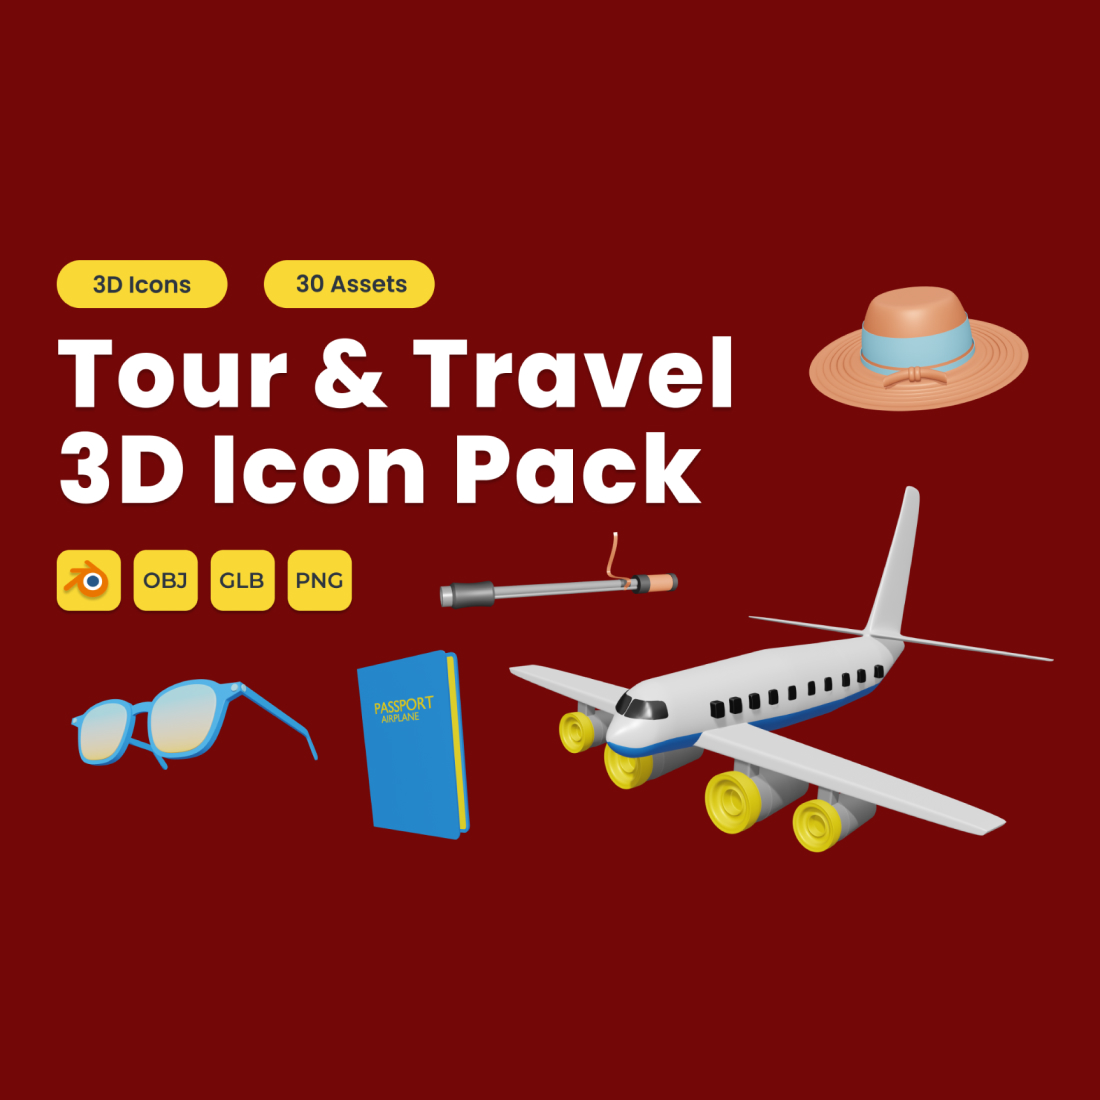 Tour and Travel 3D Icon Pack Vol 1 cover image.